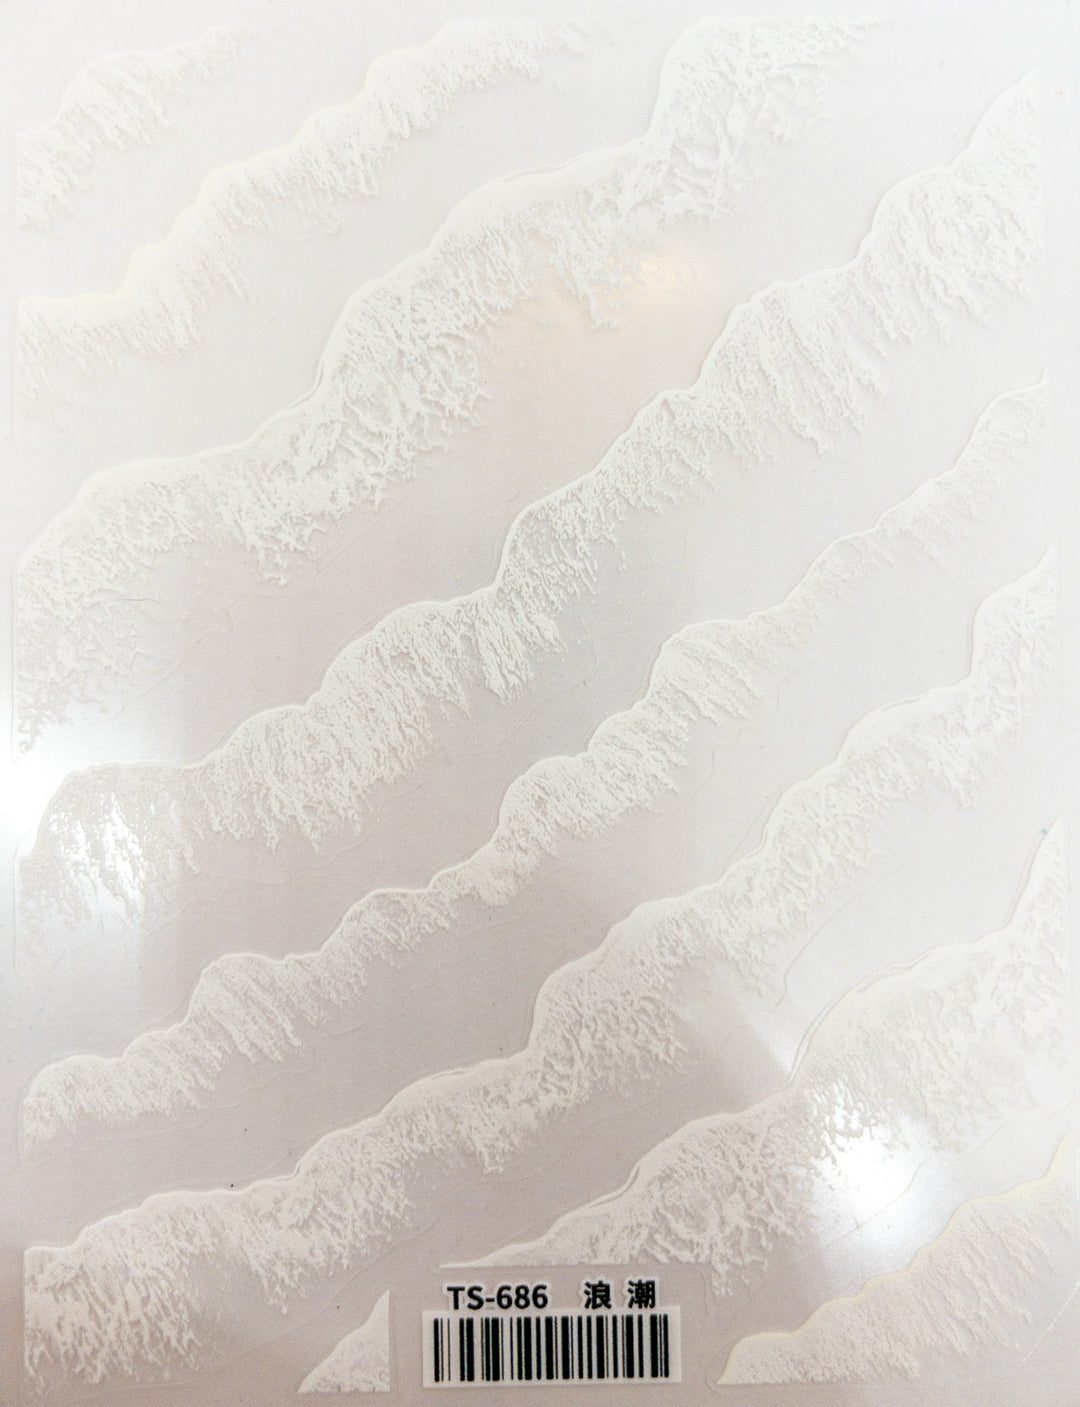 MM - Frothy Waves TS-686 Textured Decals